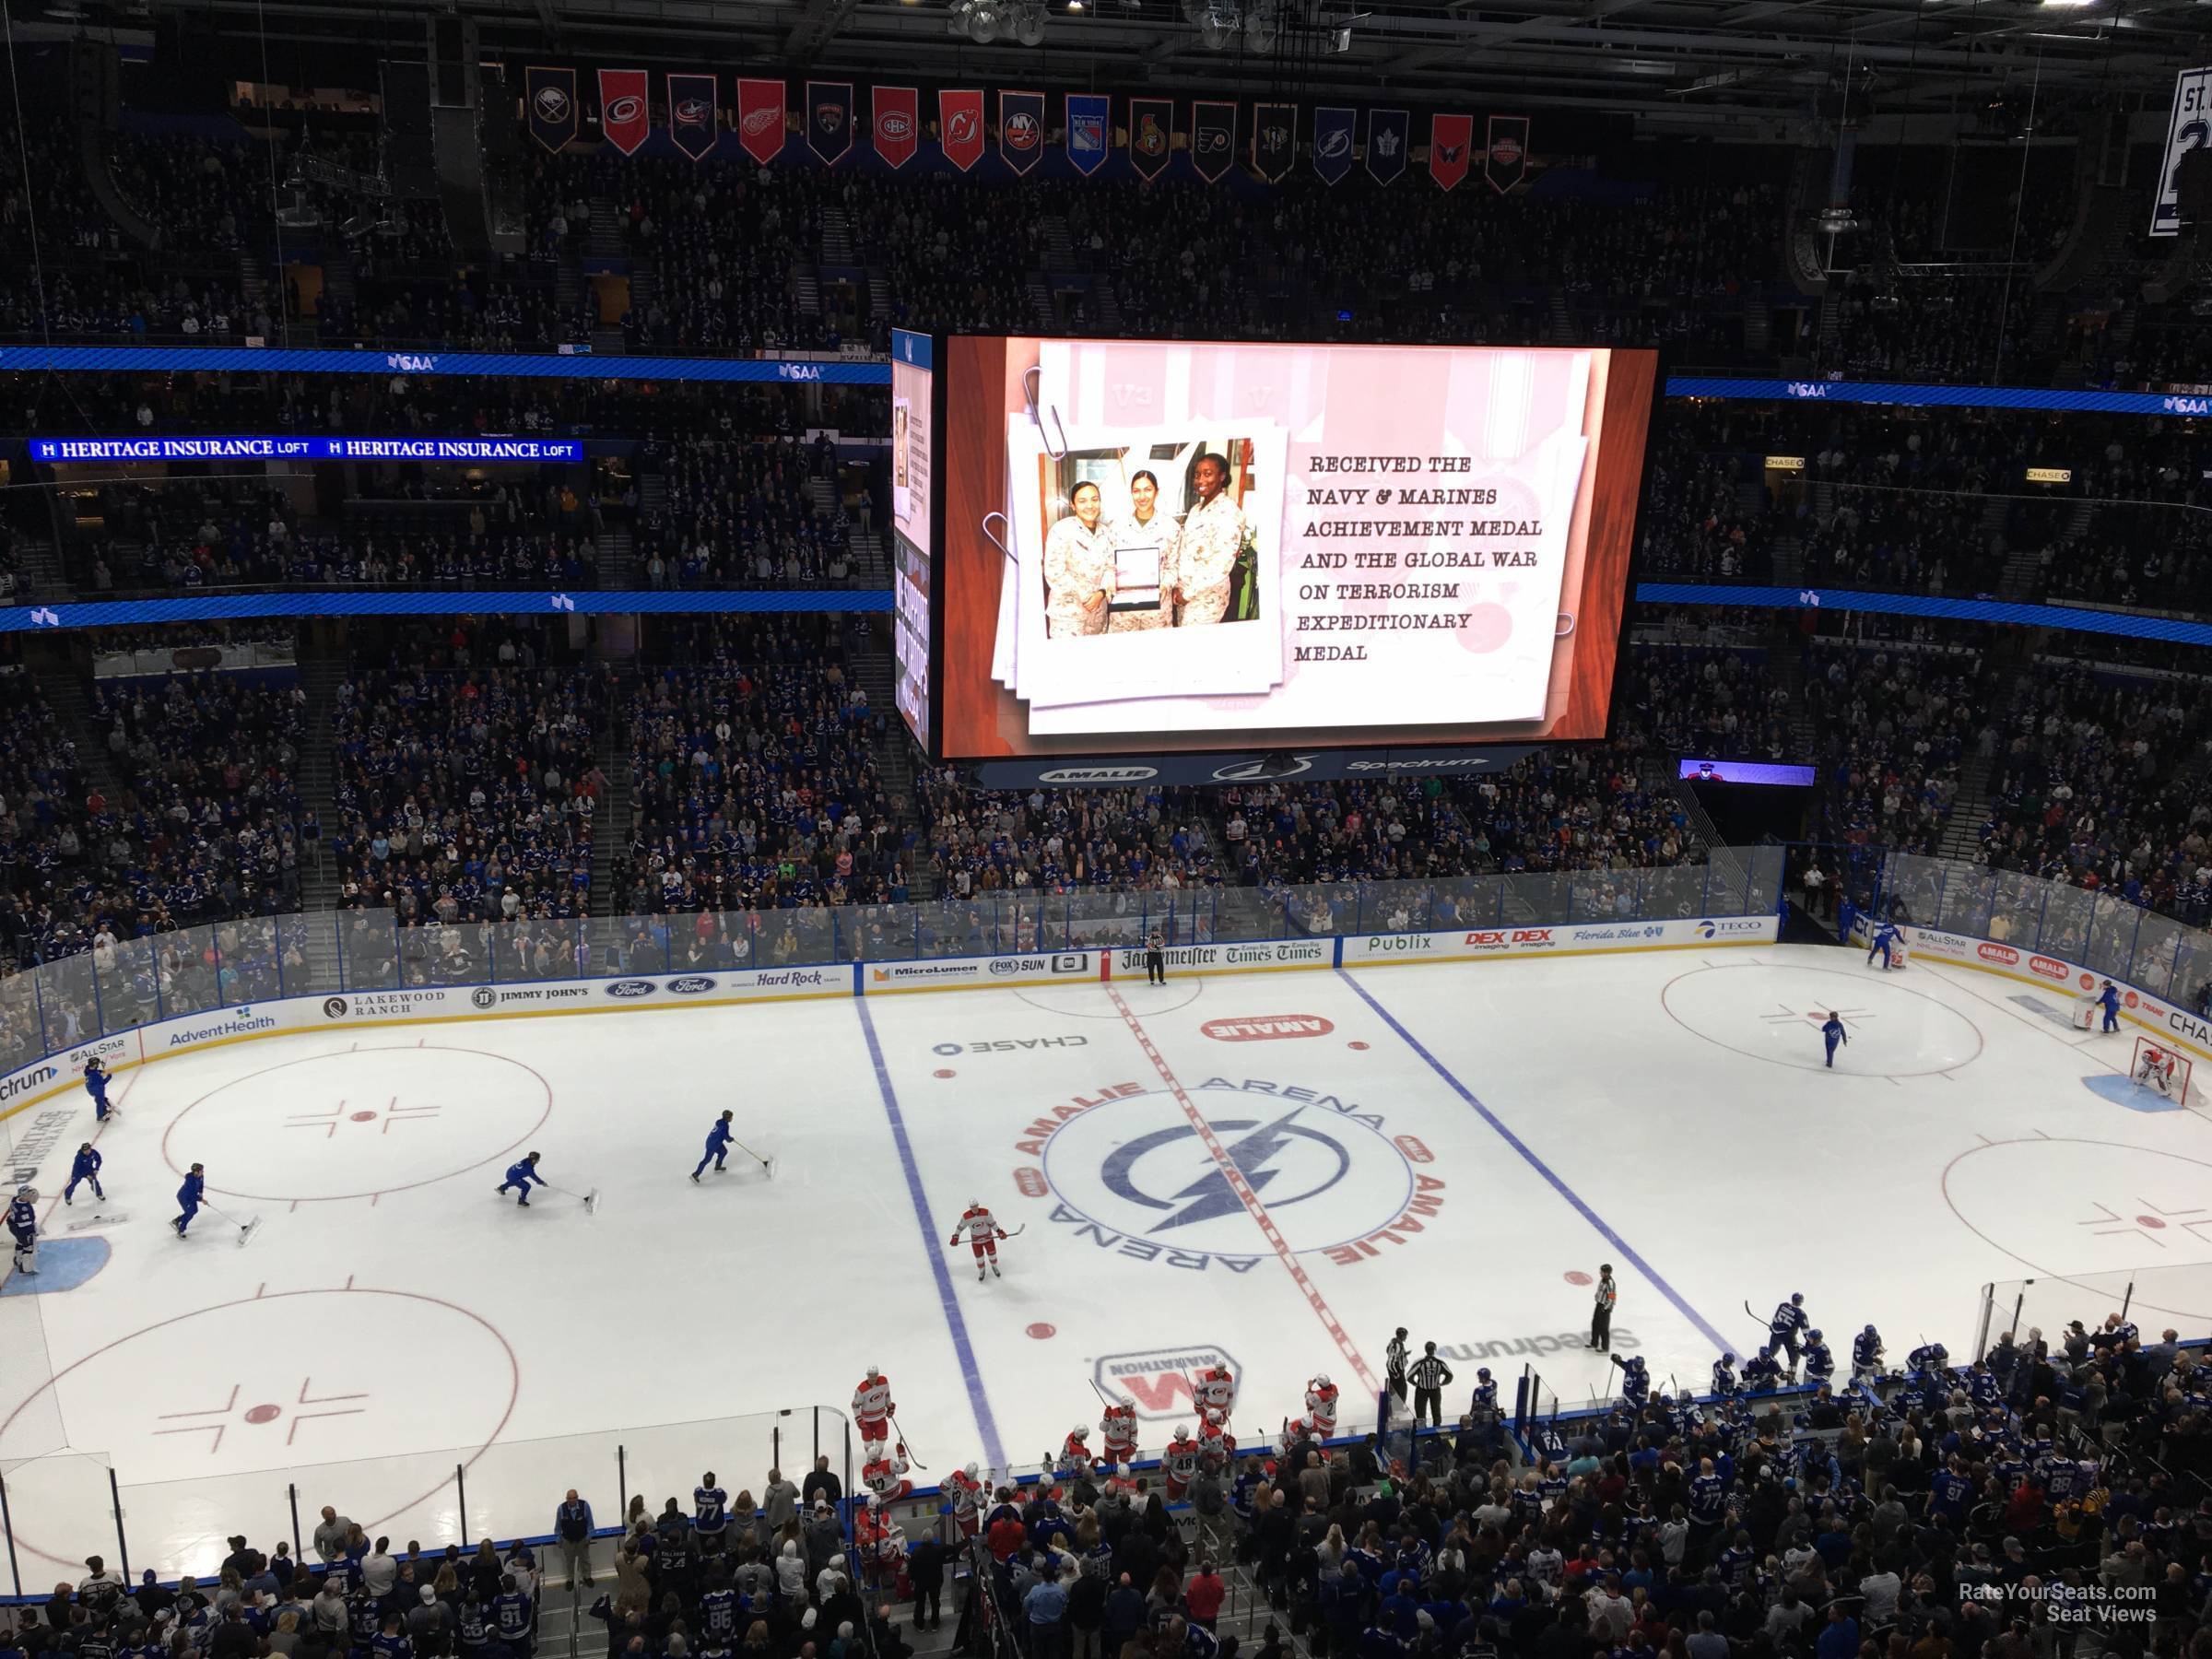 section 302, row c seat view  for hockey - amalie arena